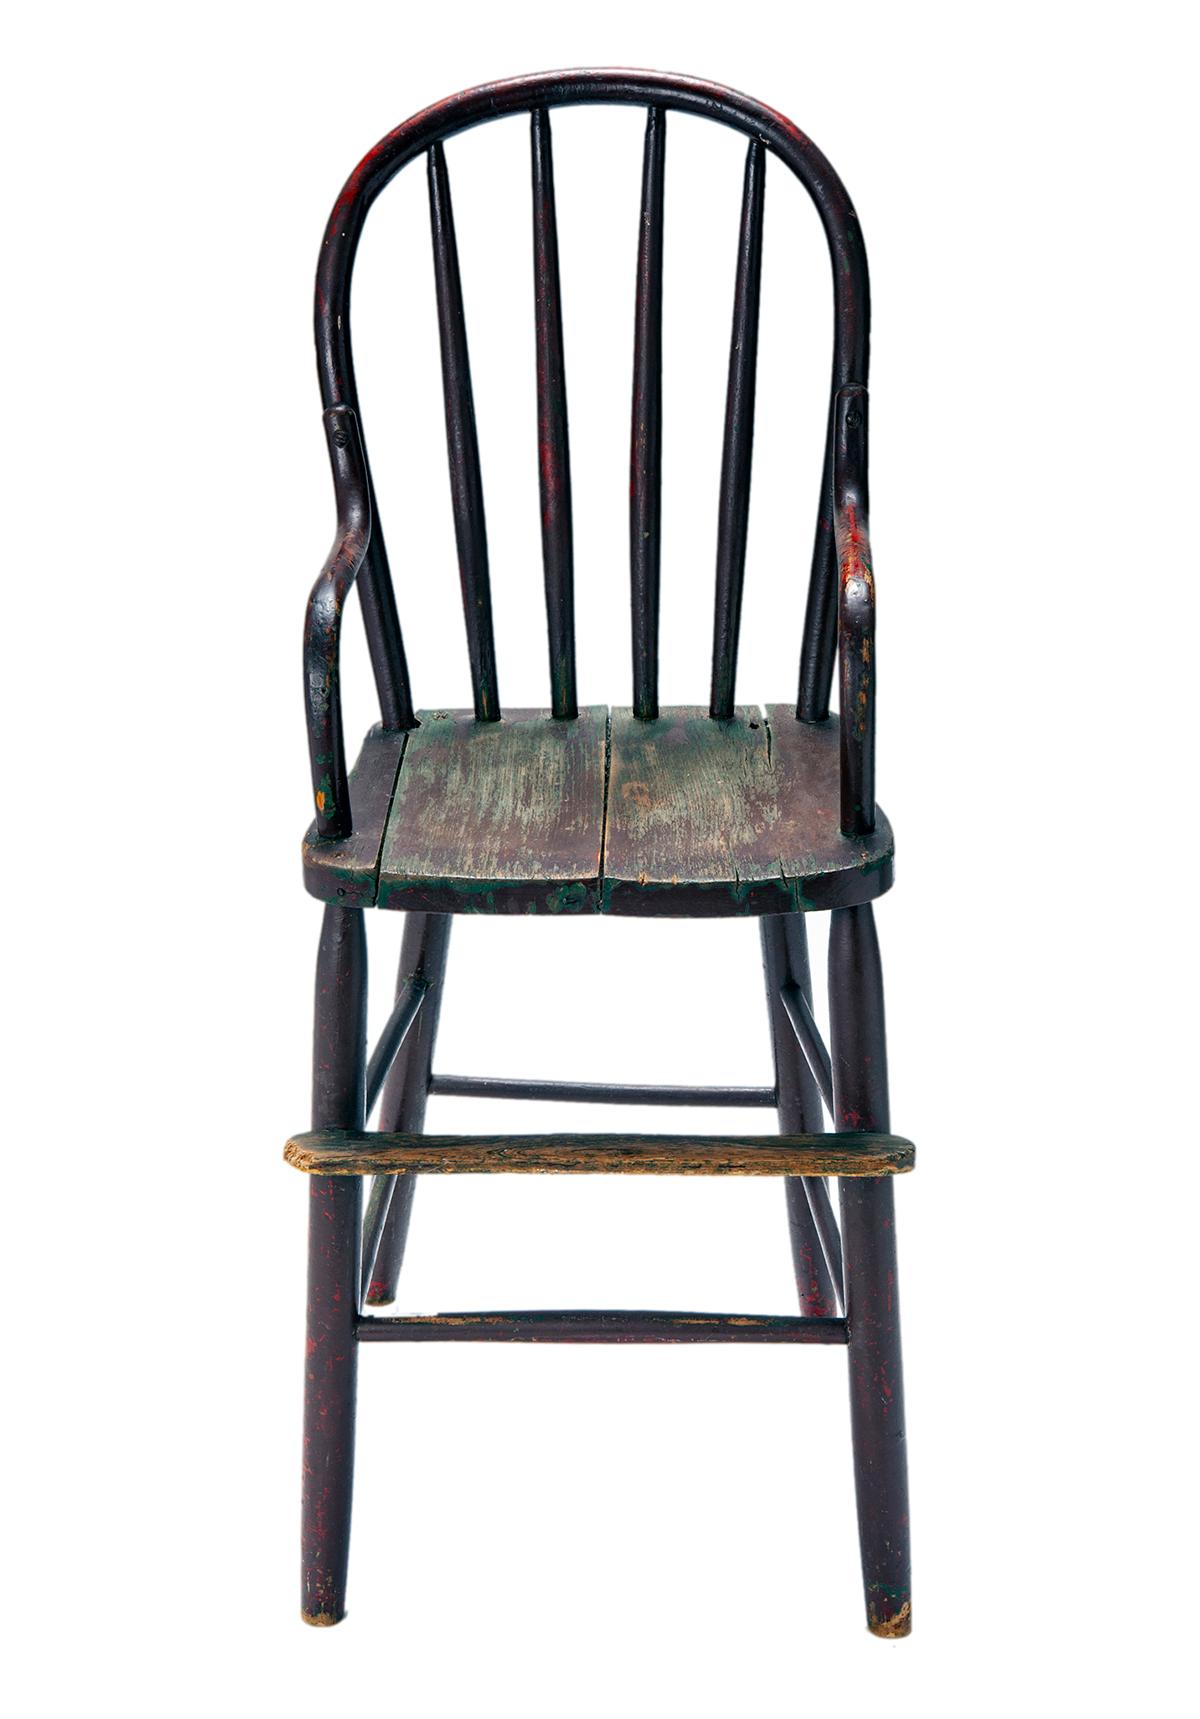 Late 19th century bentwood child's high chair with bentwood arms & platform footrest. The chair is exceptionally well made. It is solid, sturdy and does not wobble. The paint is in distressed condition. 
The underside is not marked or